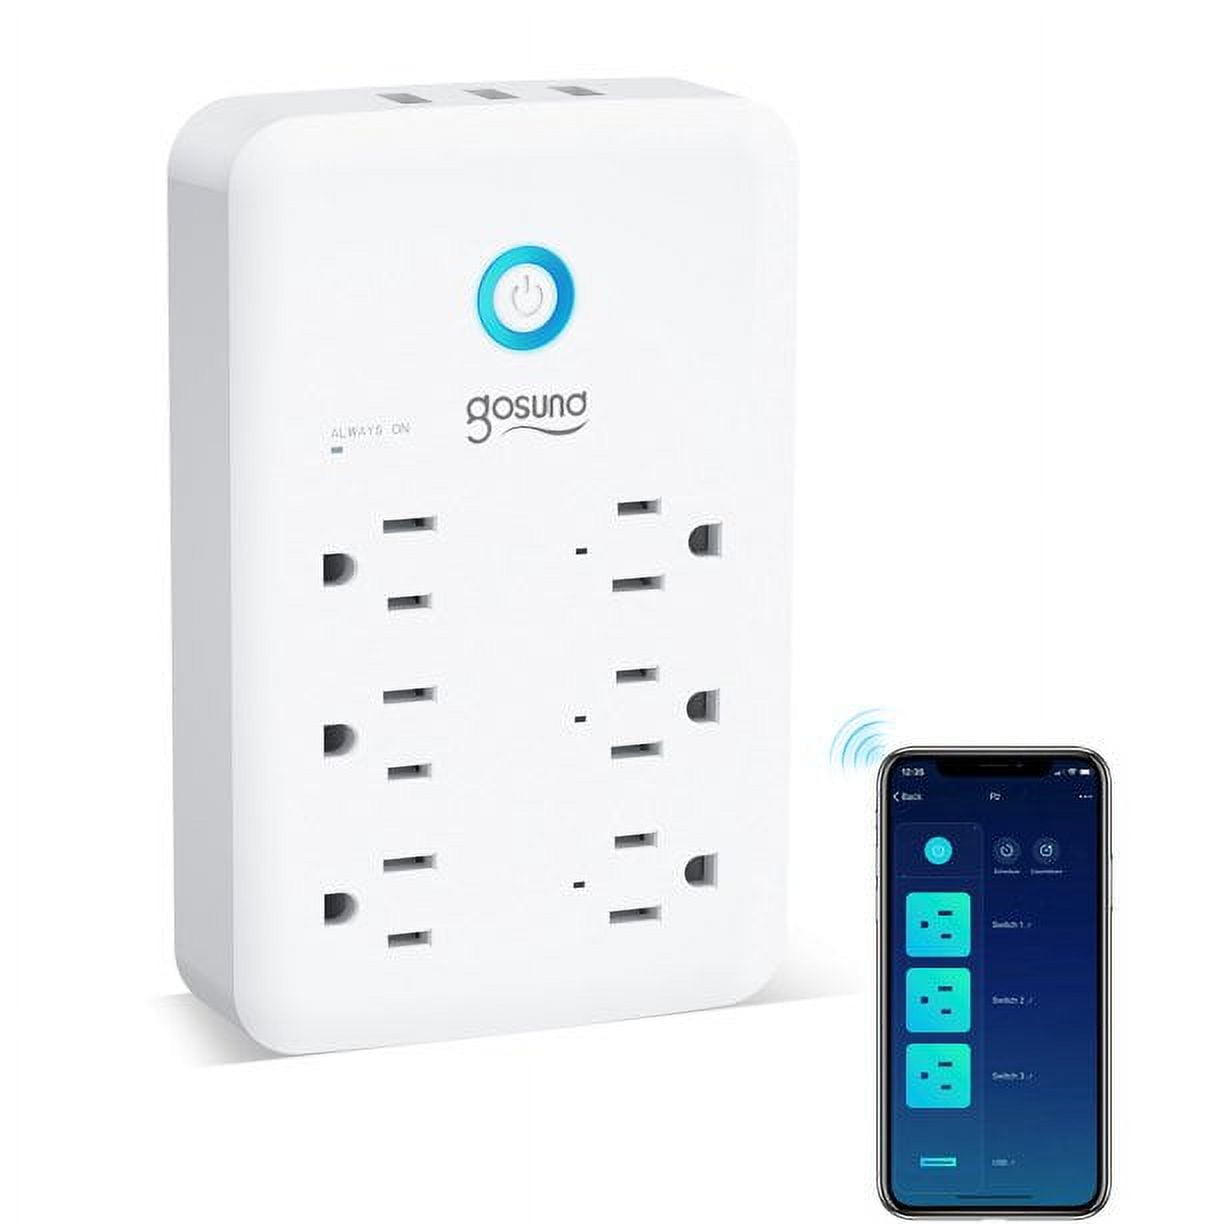 Aoycocr Bluetooth WiFi Smart Plug - Smart Outlets Work with Alexa, Google  Home Assistant, Remote Control Plugs with Timer Function, ETL/FCC/Rohs